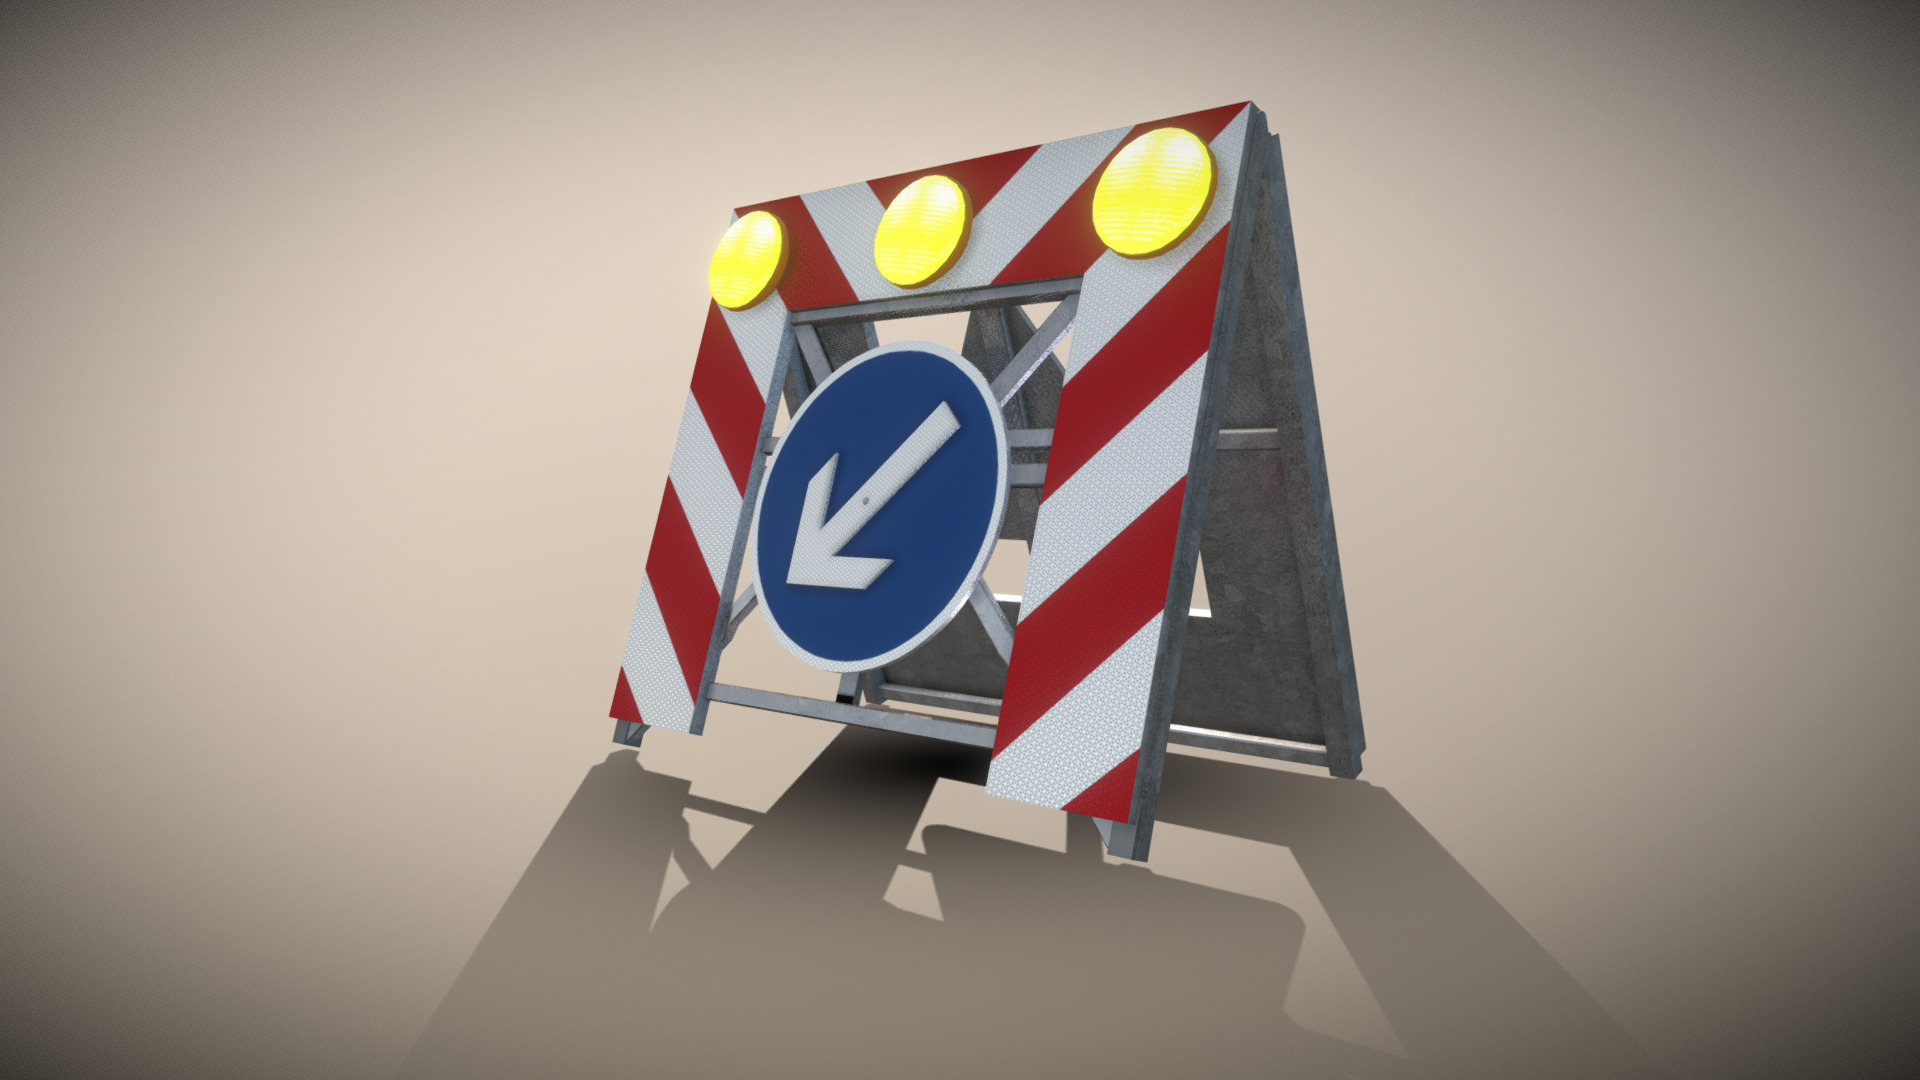 3D model Basic Road Barrier 615 (simple version) - This is a 3D model of the Basic Road Barrier 615 (simple version). The 3D model is about a logo on a wall.